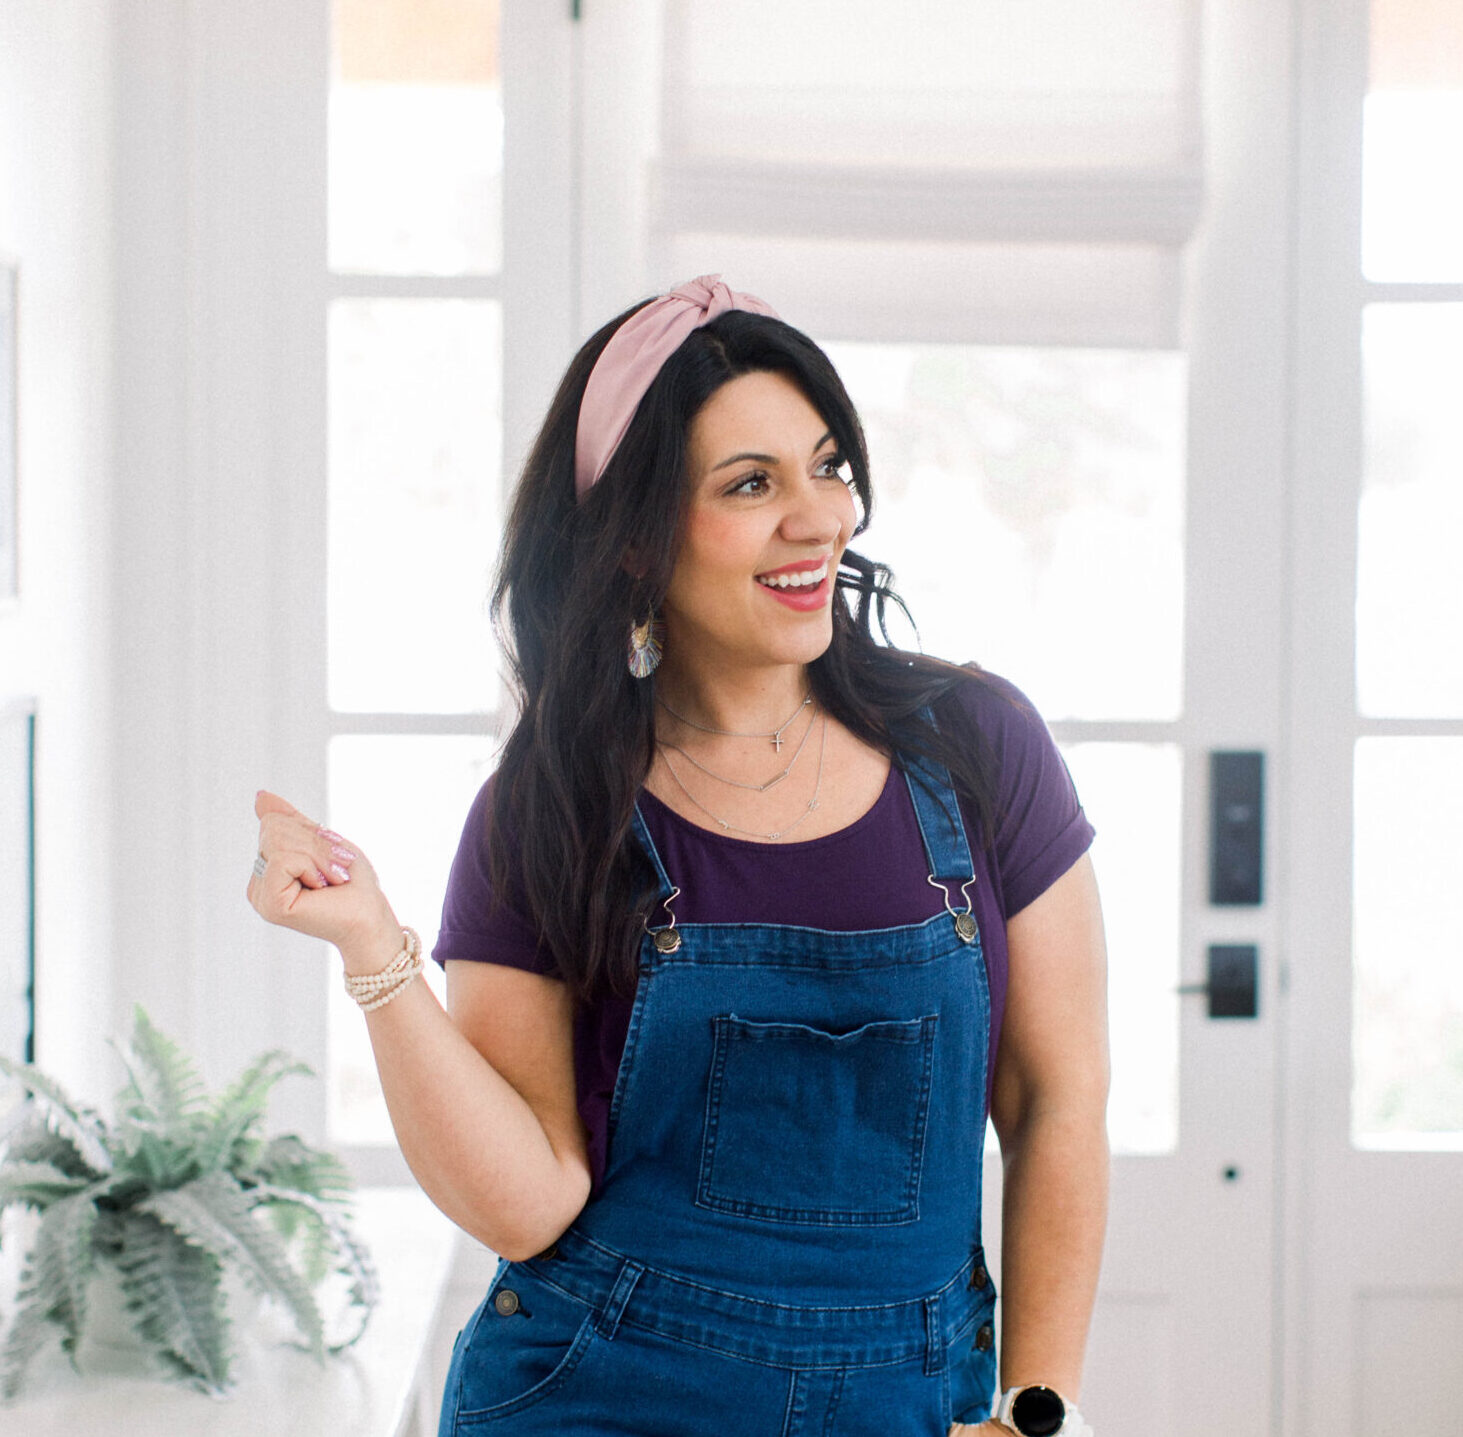 dark haired woman wearing denim overalls and a purple shirt, has her left hand resting at her pocket and her right hand up in the finger-snapping position. She is standing in a mostly white room with a plant on a shelf behind her.